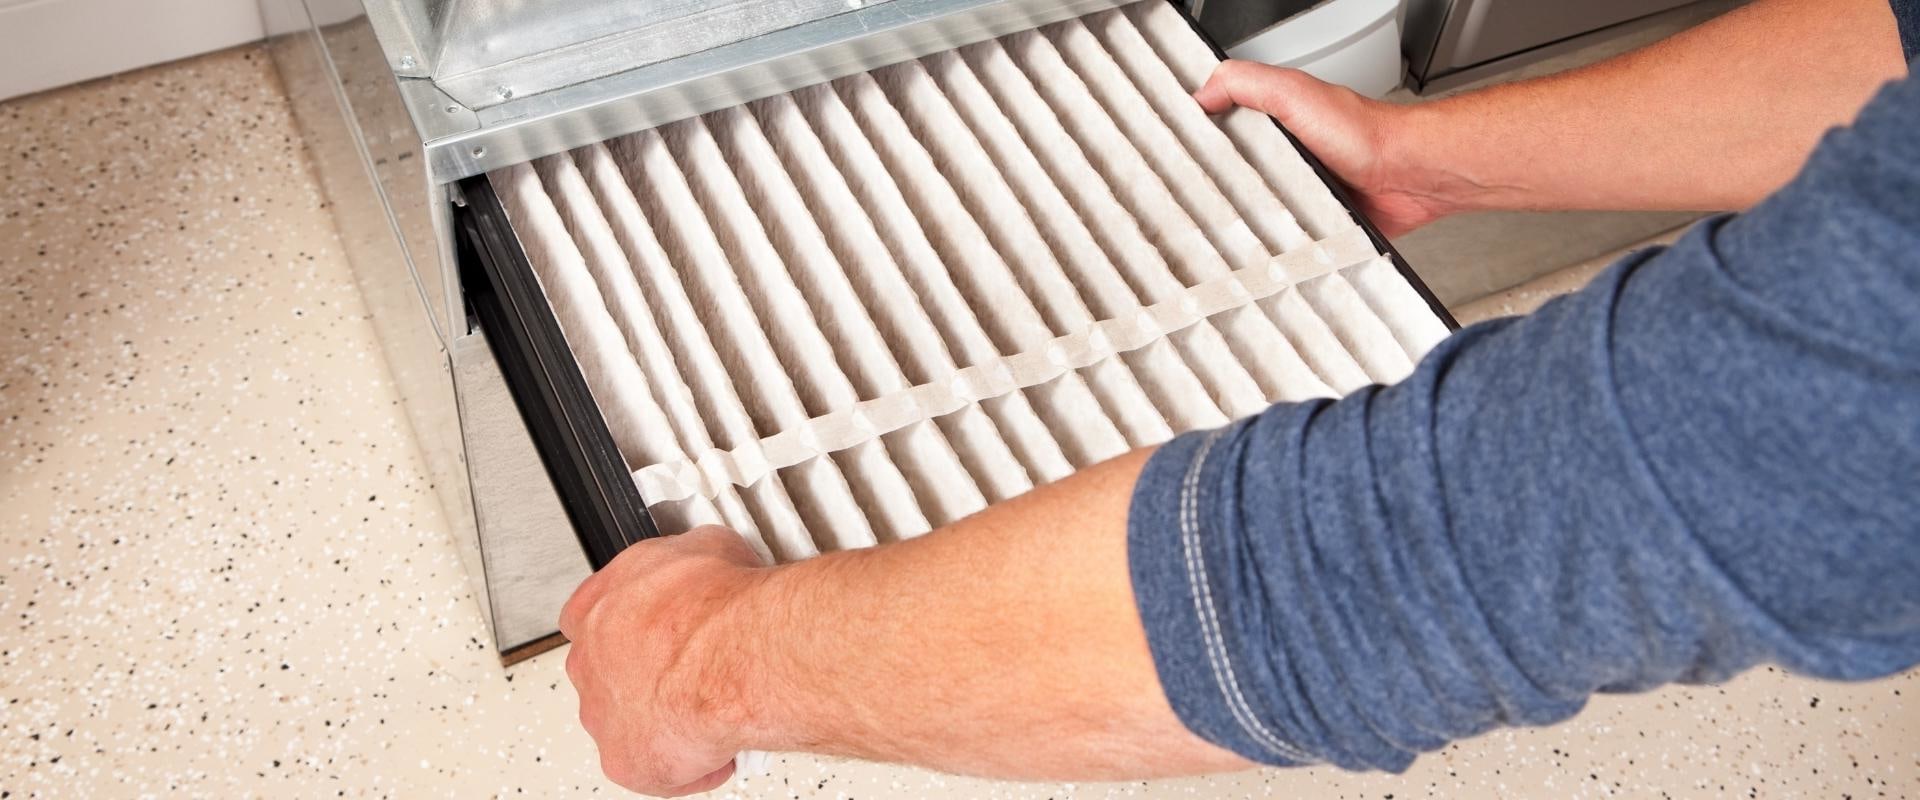 Expert Advice on How to Measure HVAC Furnace Air Filter Size